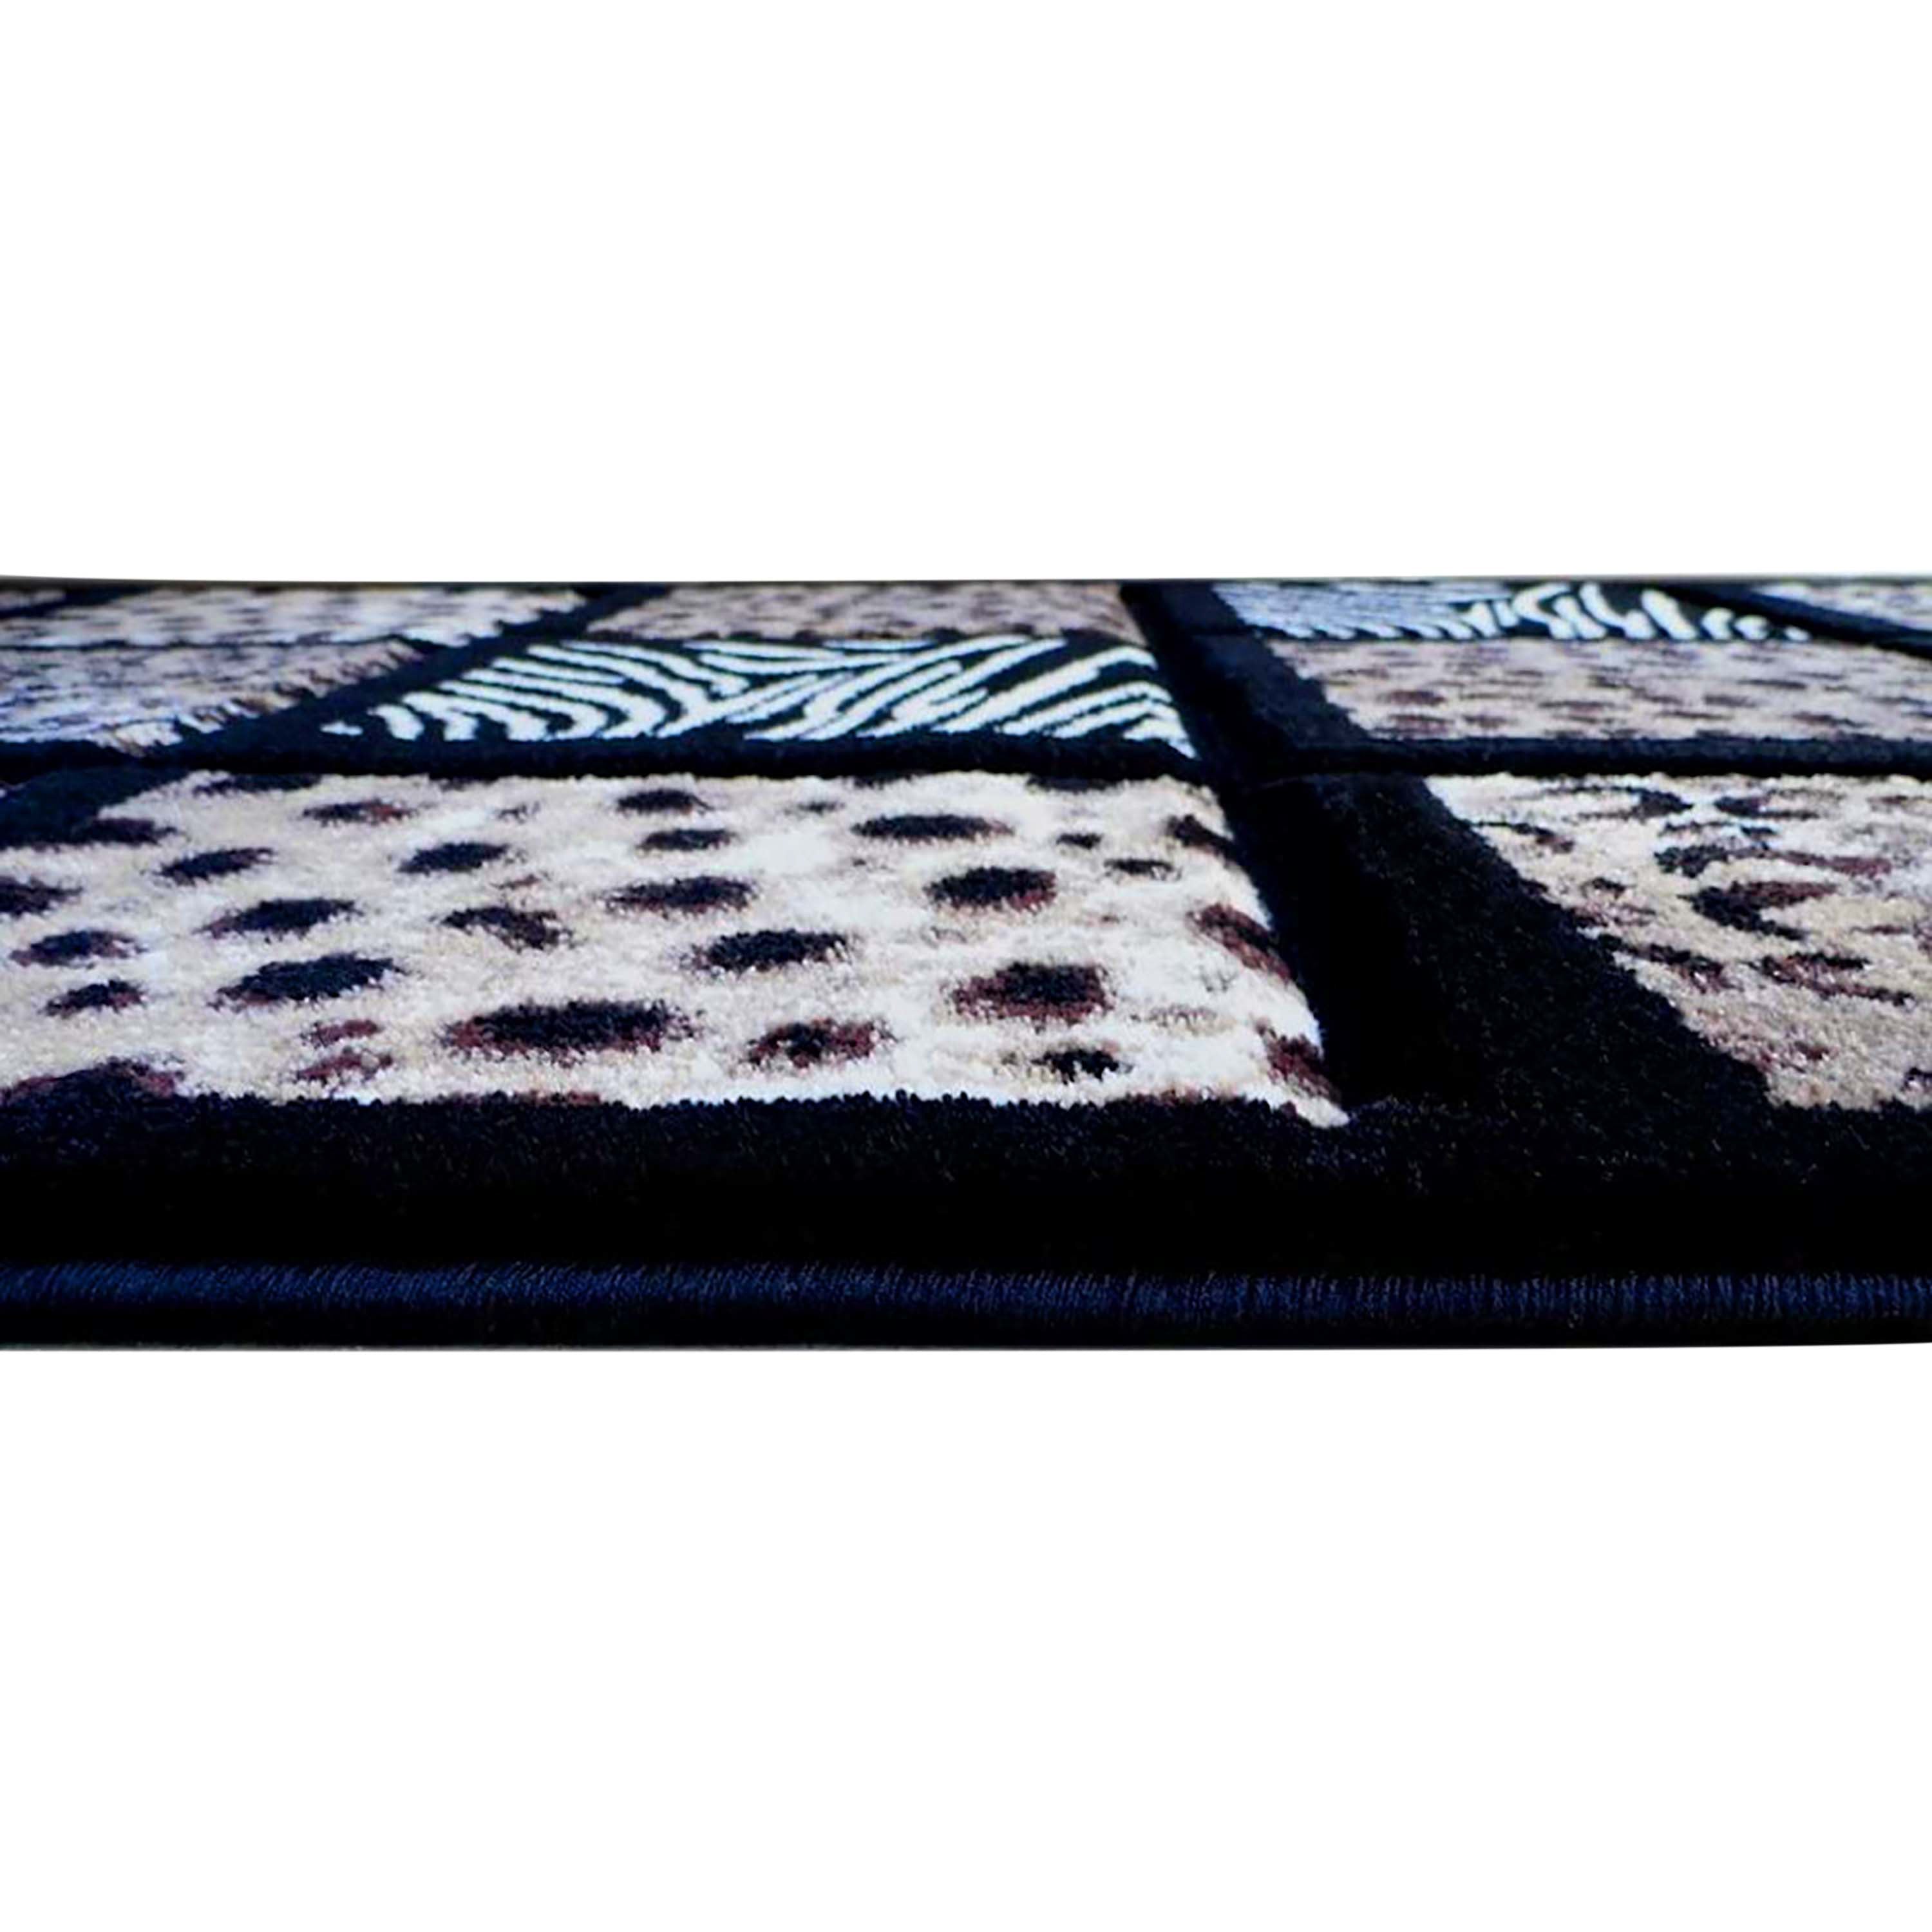 Menagerie Collection Modern Animal Print Olefin Area Rug with Cheetah, Leopard, Zebra and Giraffe Design Raised Squares-Area Rug-Flash Furniture-Wall2Wall Furnishings